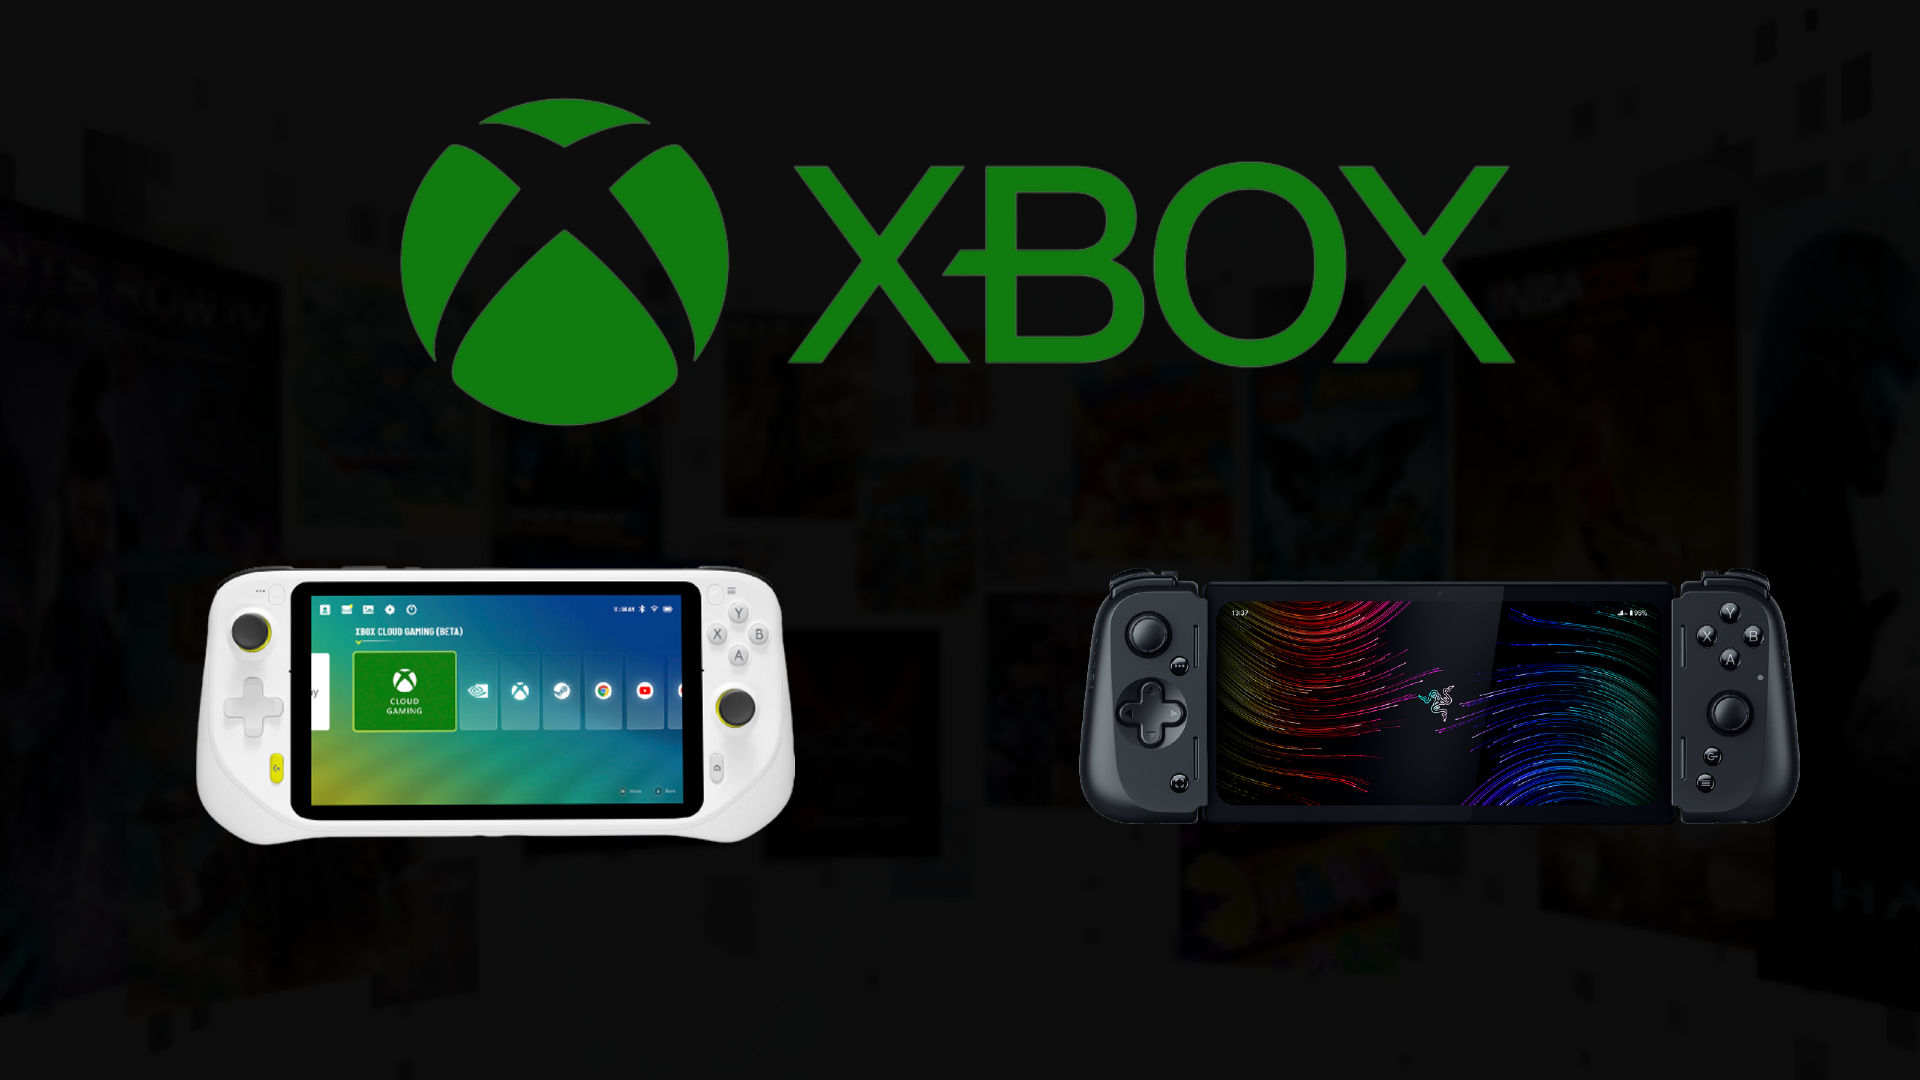 The Xbox logo positioned above the Logitech G Cloud and Razer Edge handheld consoles.